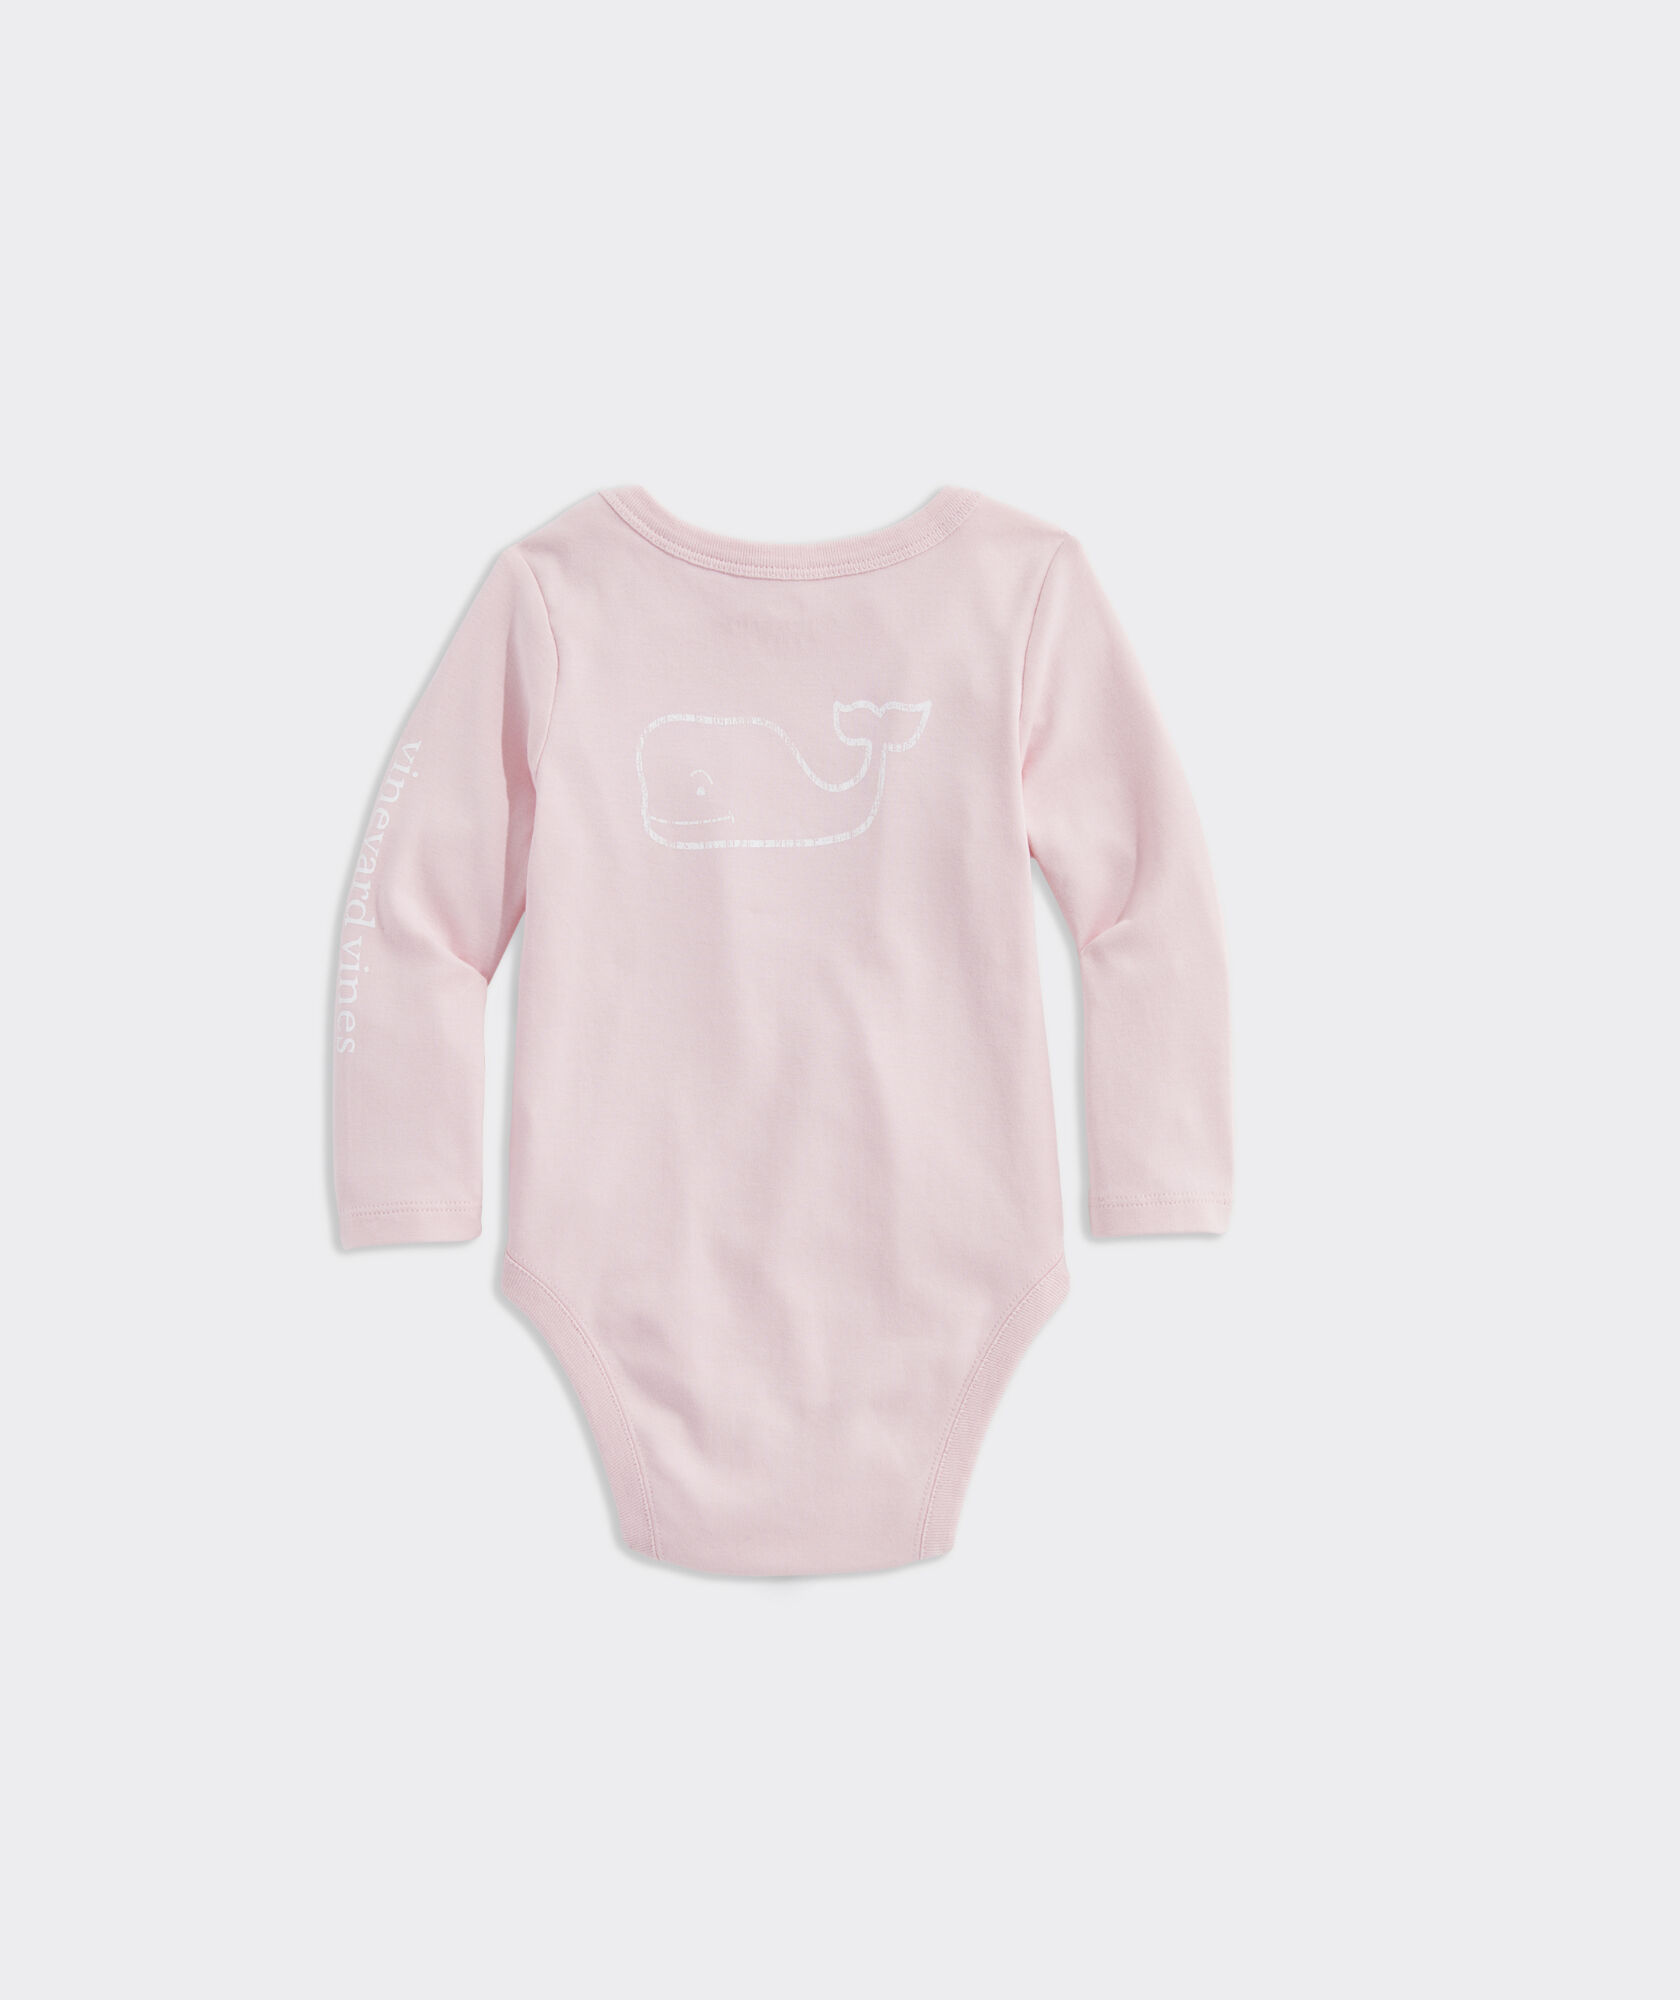 Baby Long-Sleeve Vintage Whale Body Suit